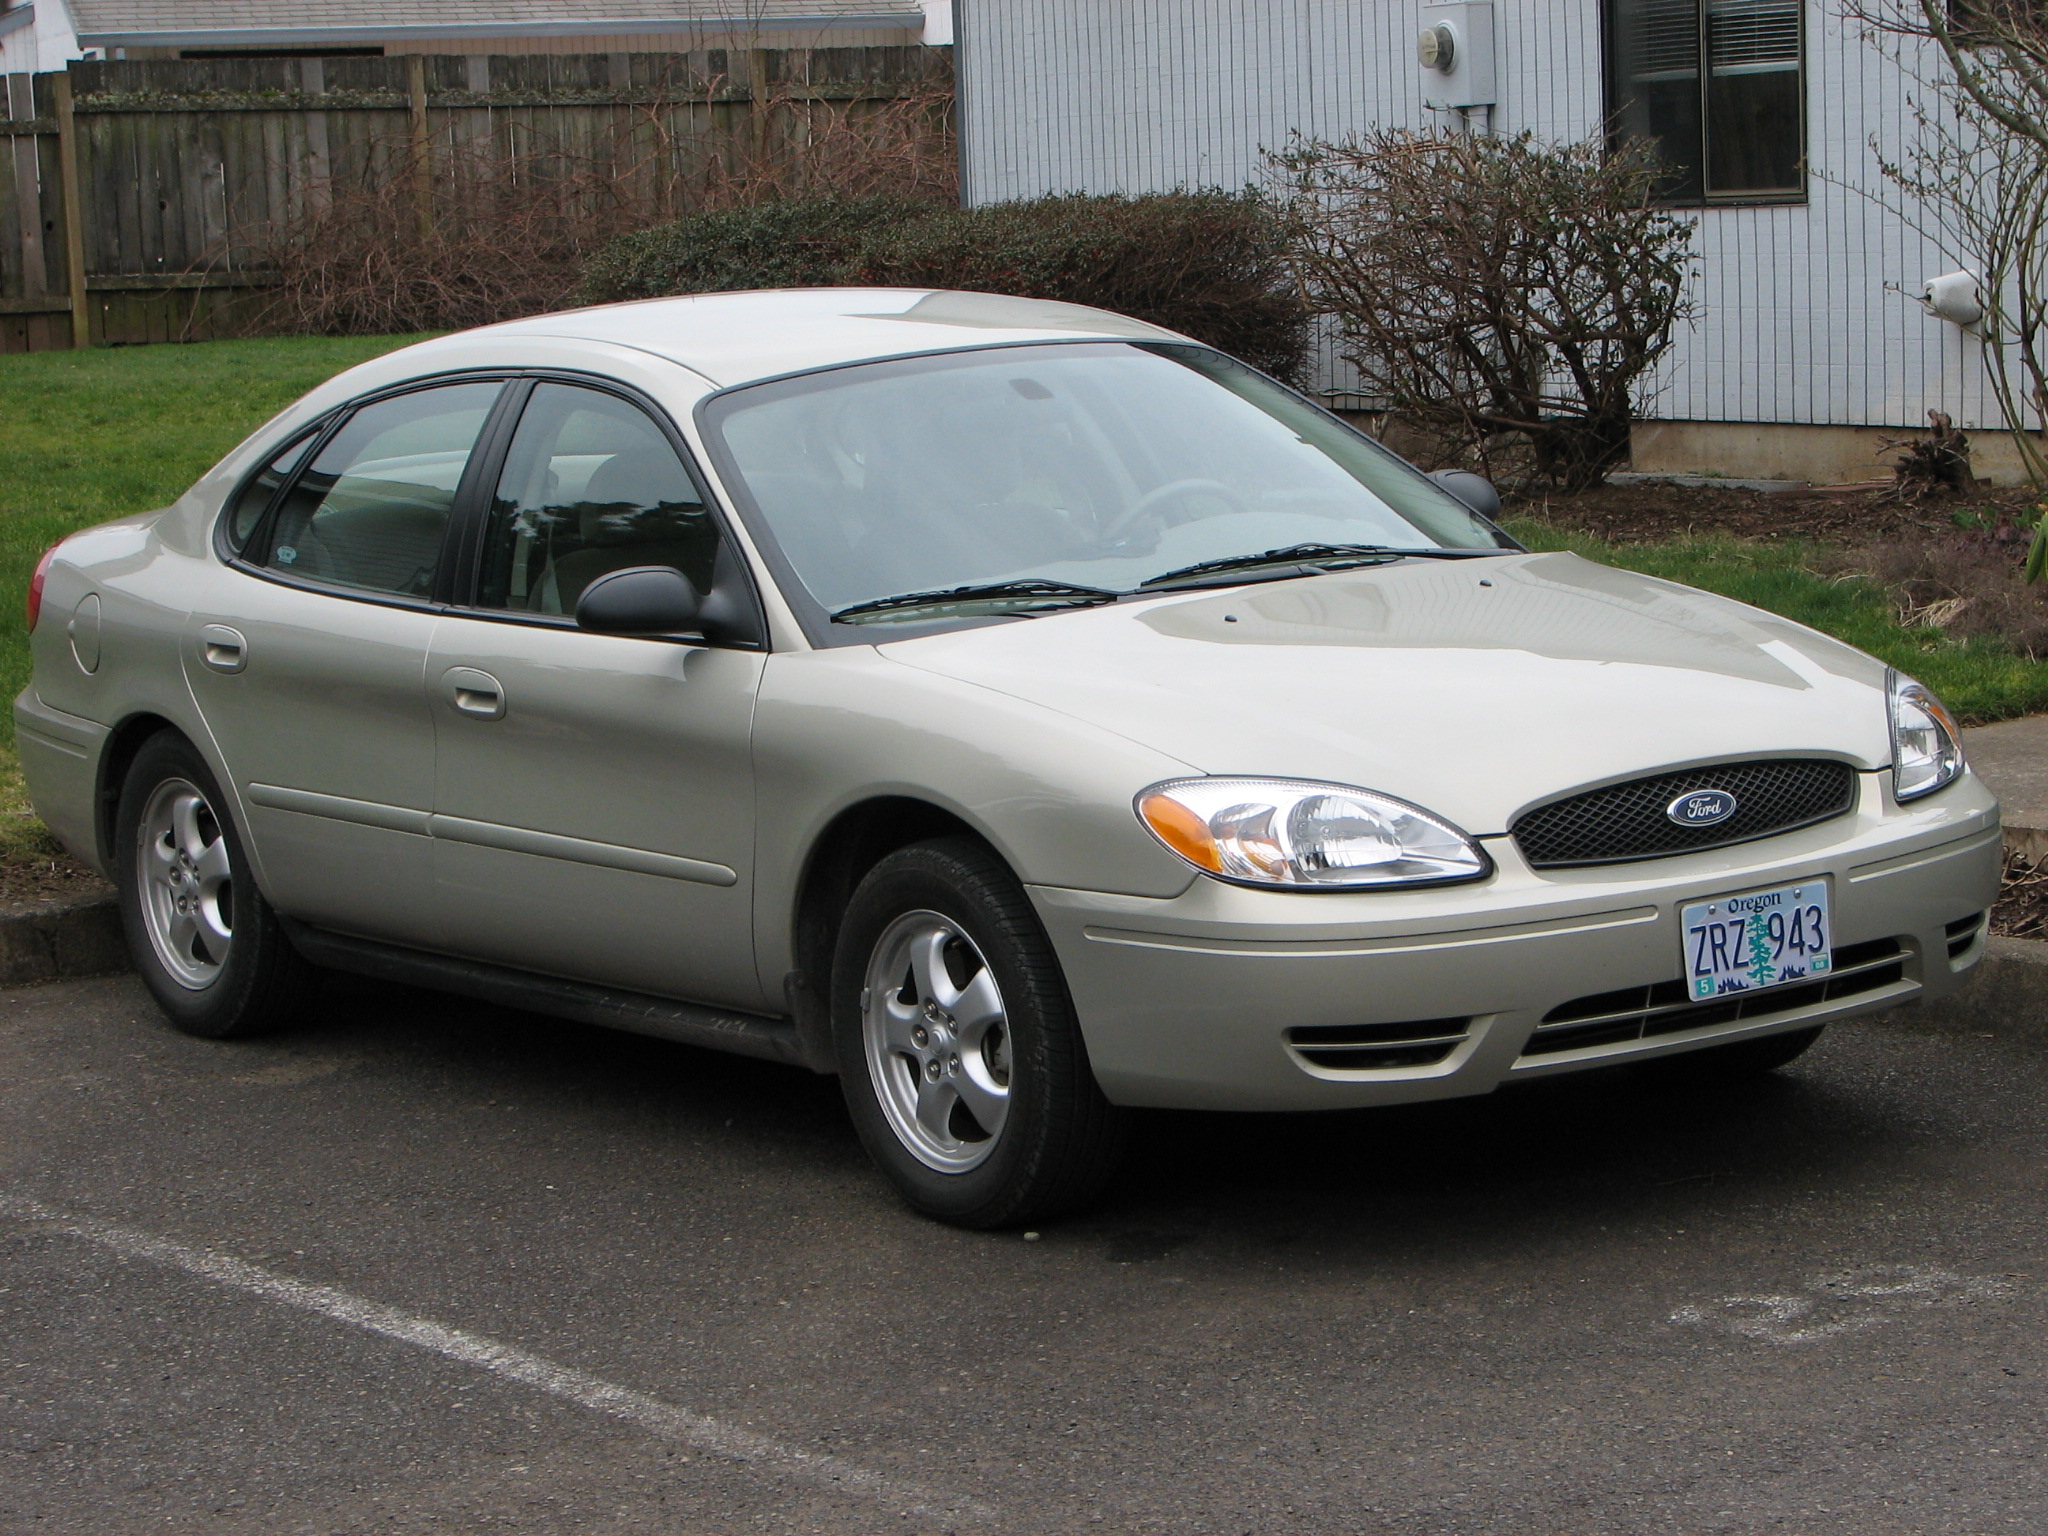 Ford Taurus Images